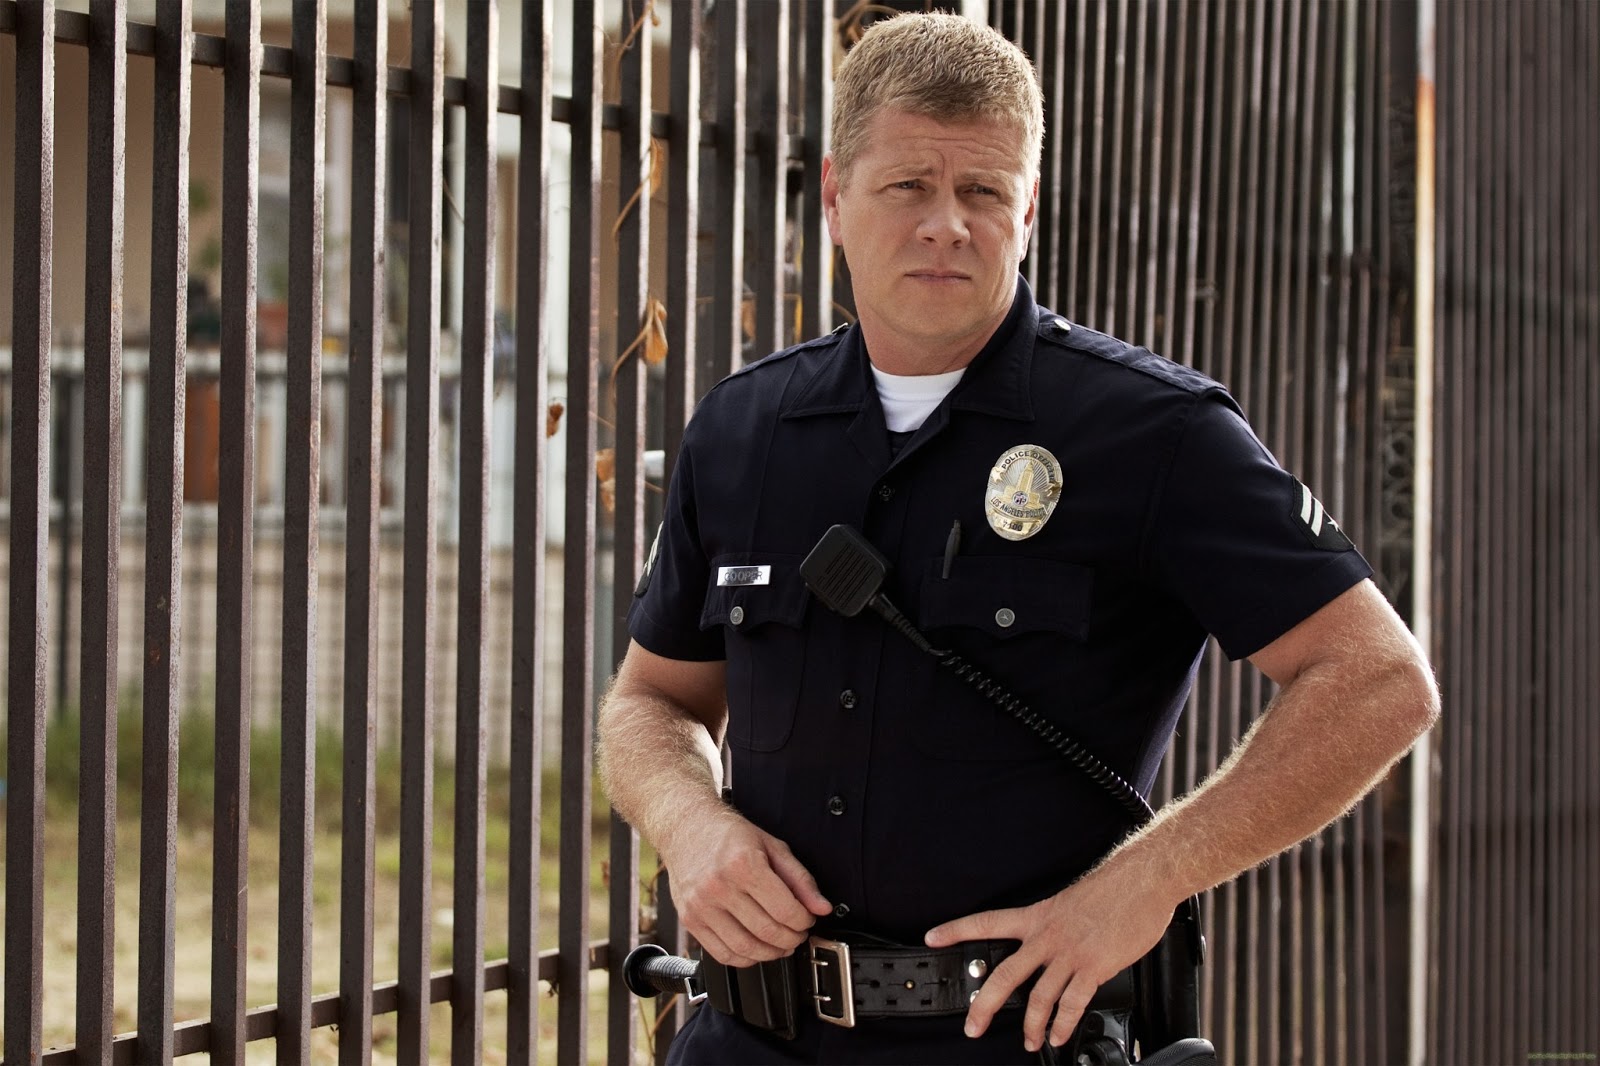 8. Michael Cudlitz- Southland This has been an even longer time coming. 